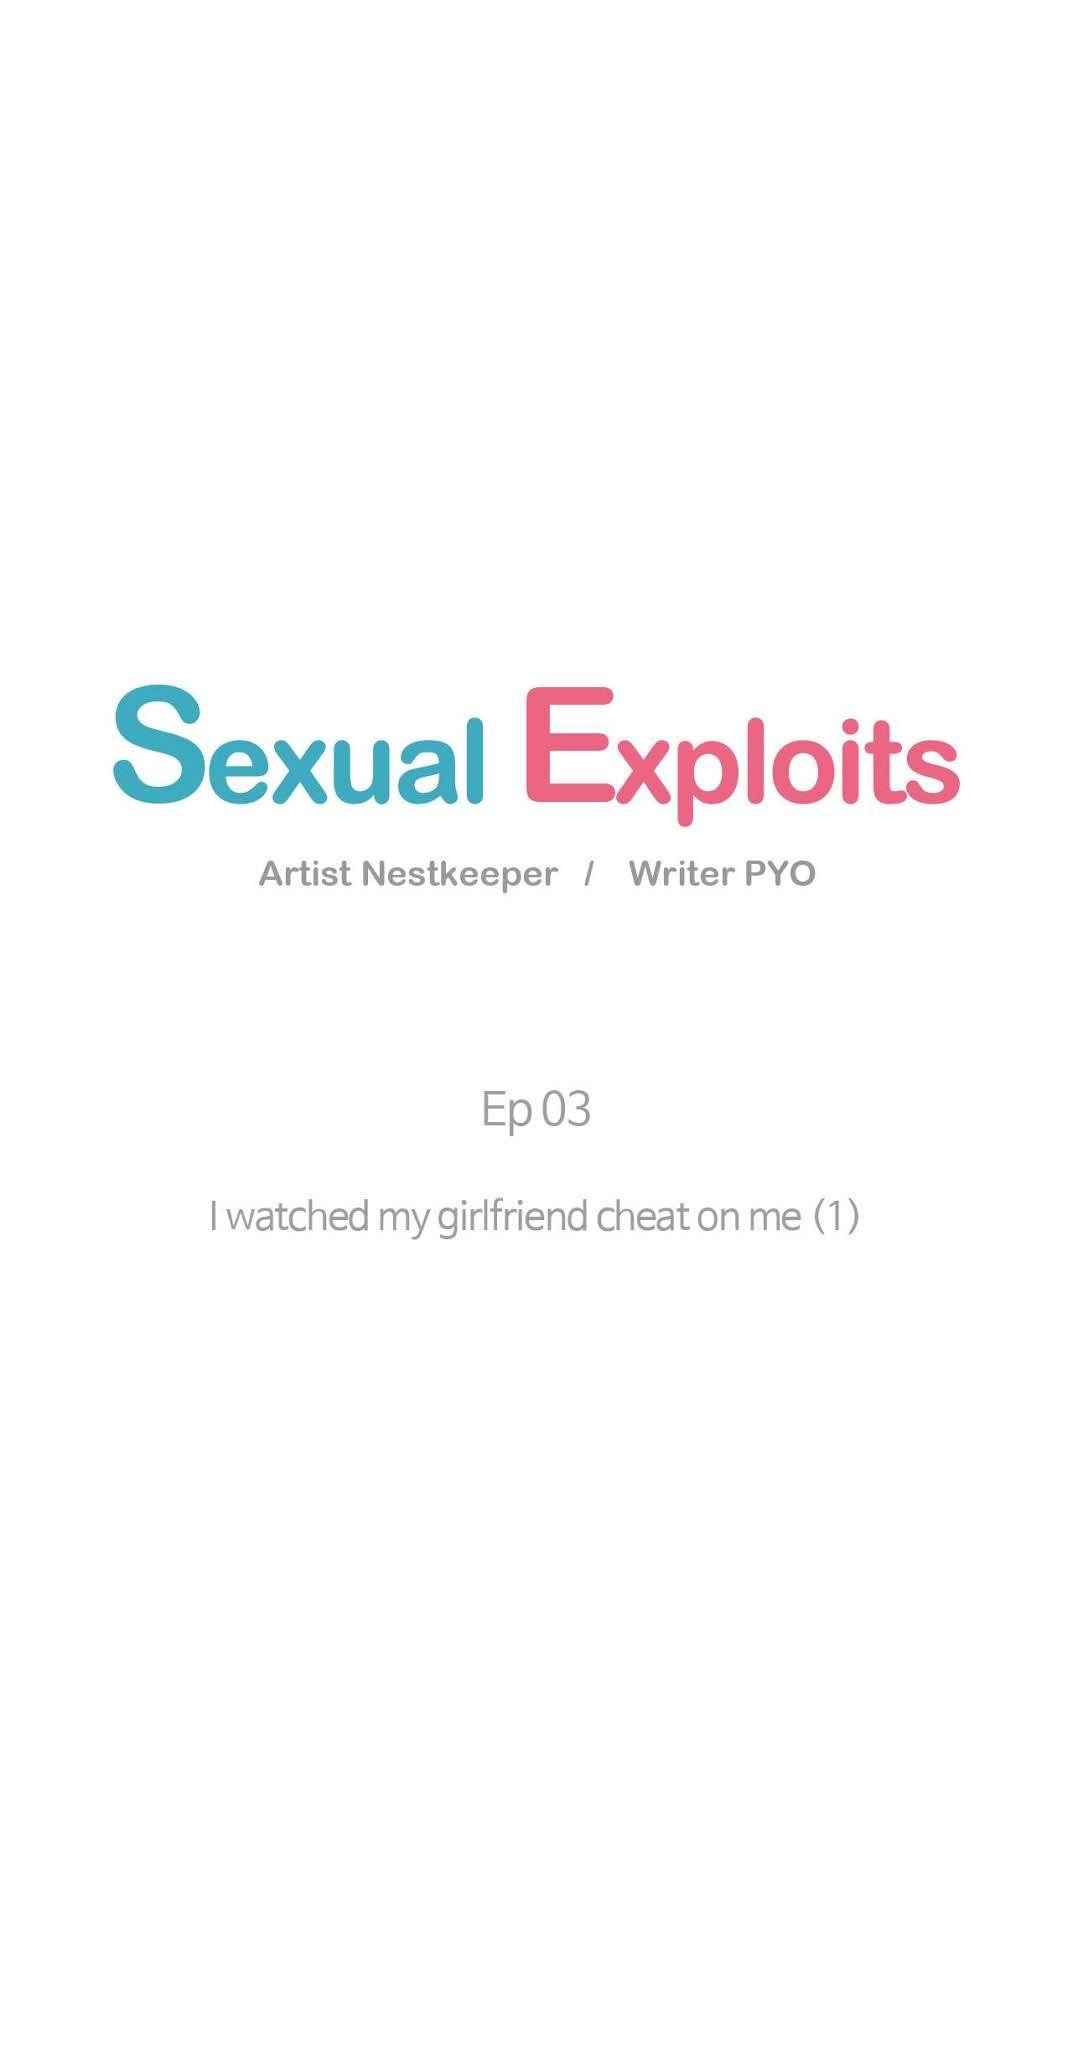 Free Amature Sexual Exploits - I watched my girlfriend cheat on me Jeune Mec - Page 5